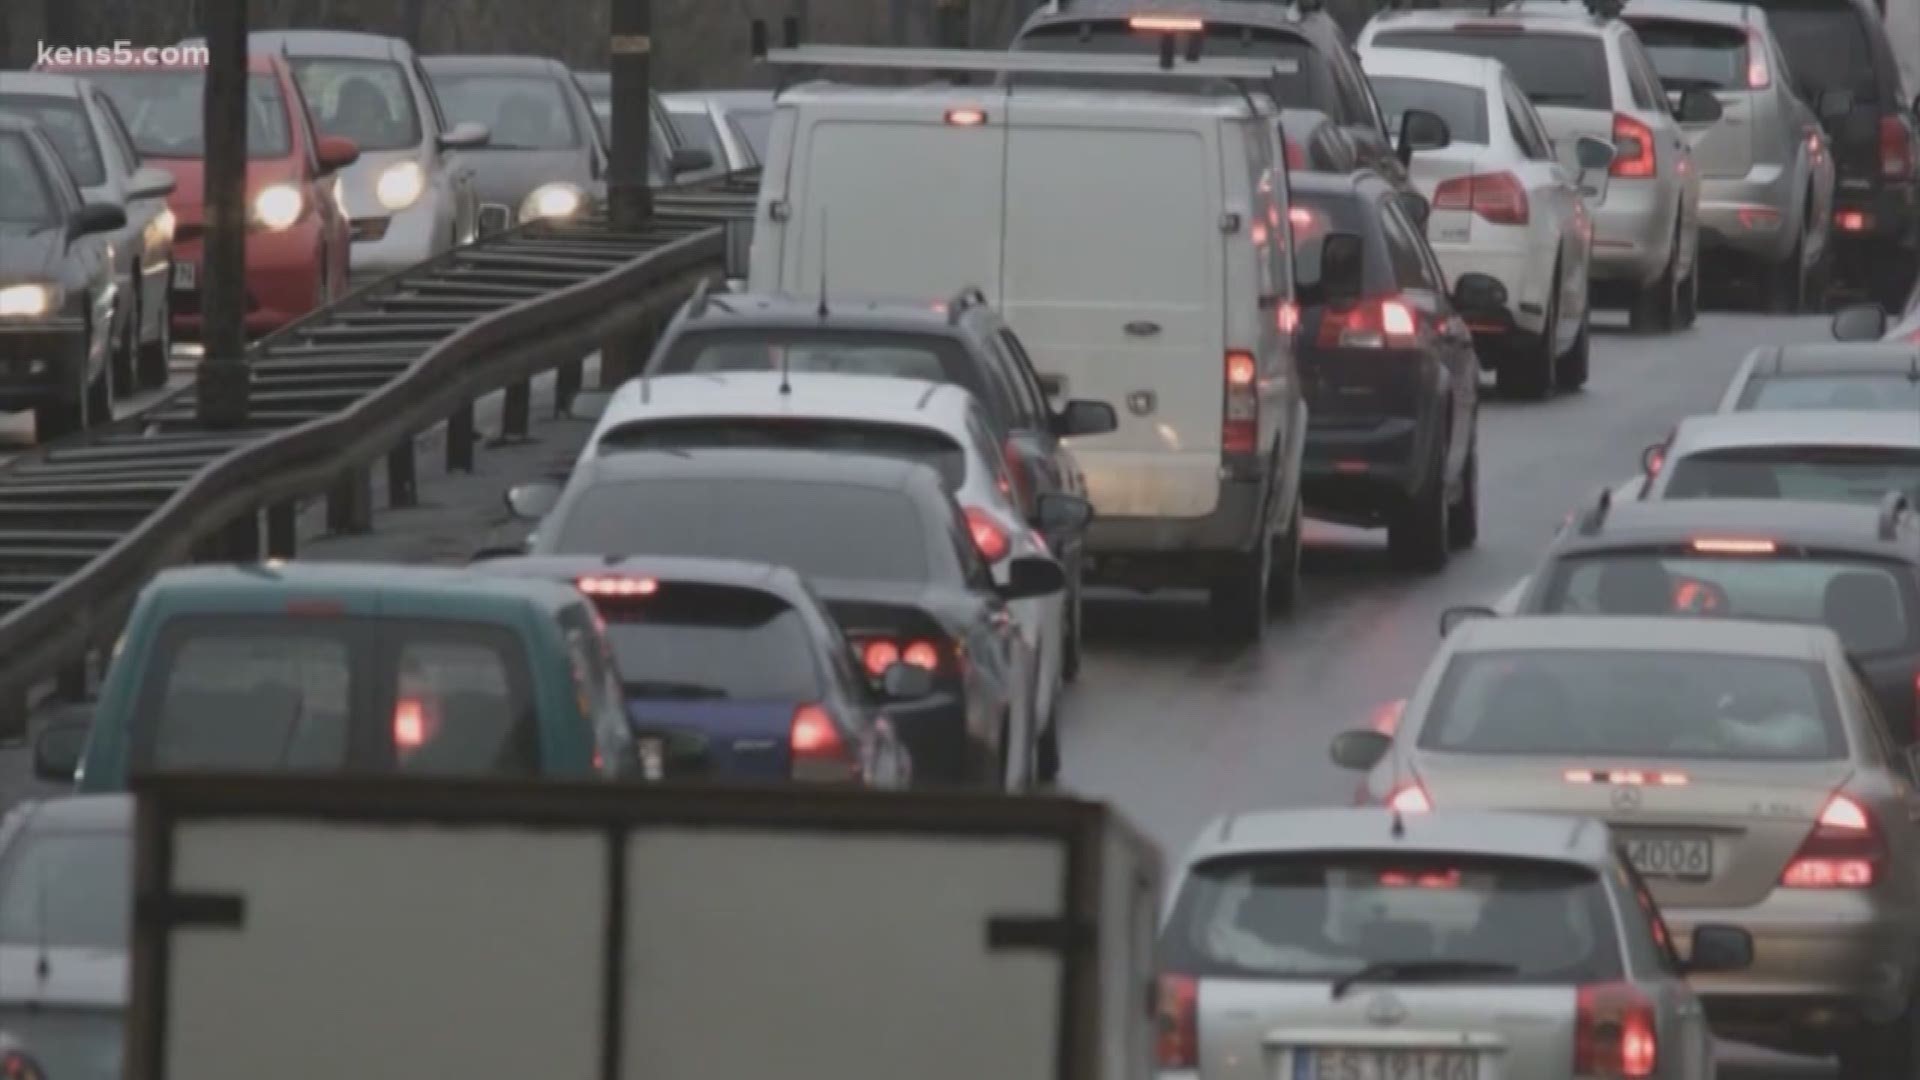 Sometimes San Antonio drivers can really “pump the brakes” on your morning mood. Is your drive home even worse?